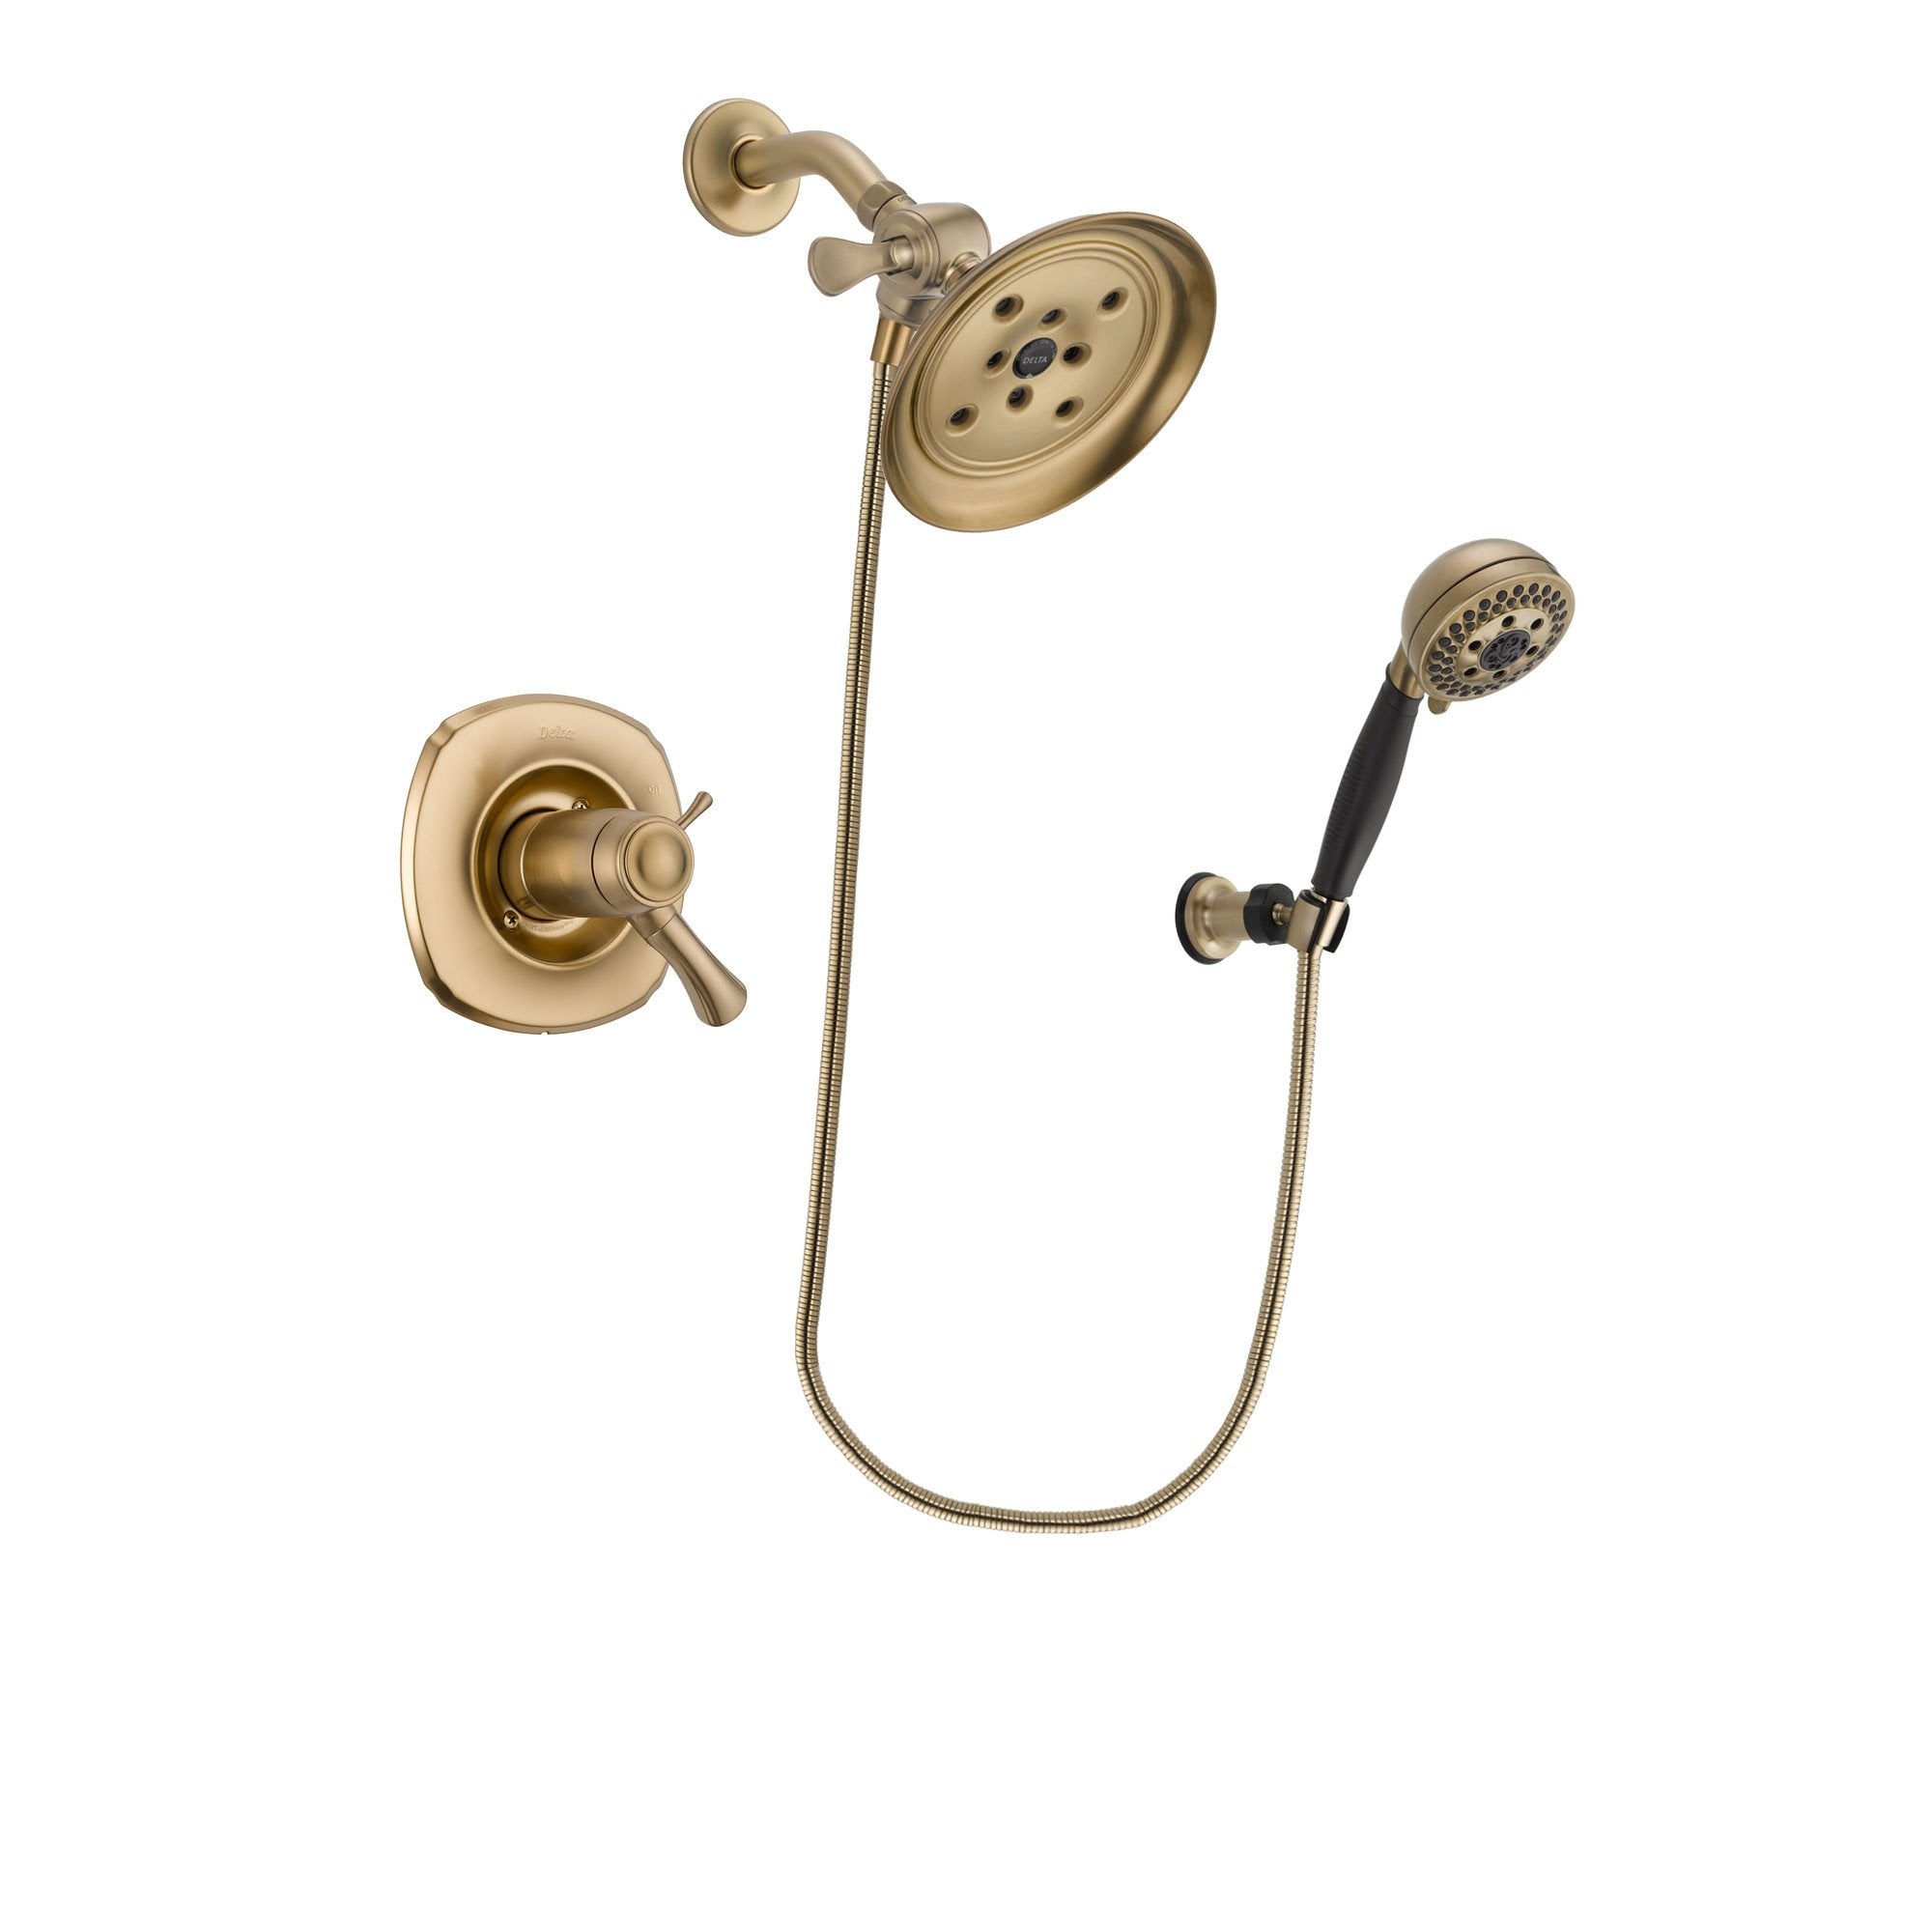 Delta Addison Champagne Bronze Finish Thermostatic Shower Faucet System Package with Large Rain Shower Head and 5-Spray Wall Mount Hand Shower Includes Rough-in Valve DSP3790V